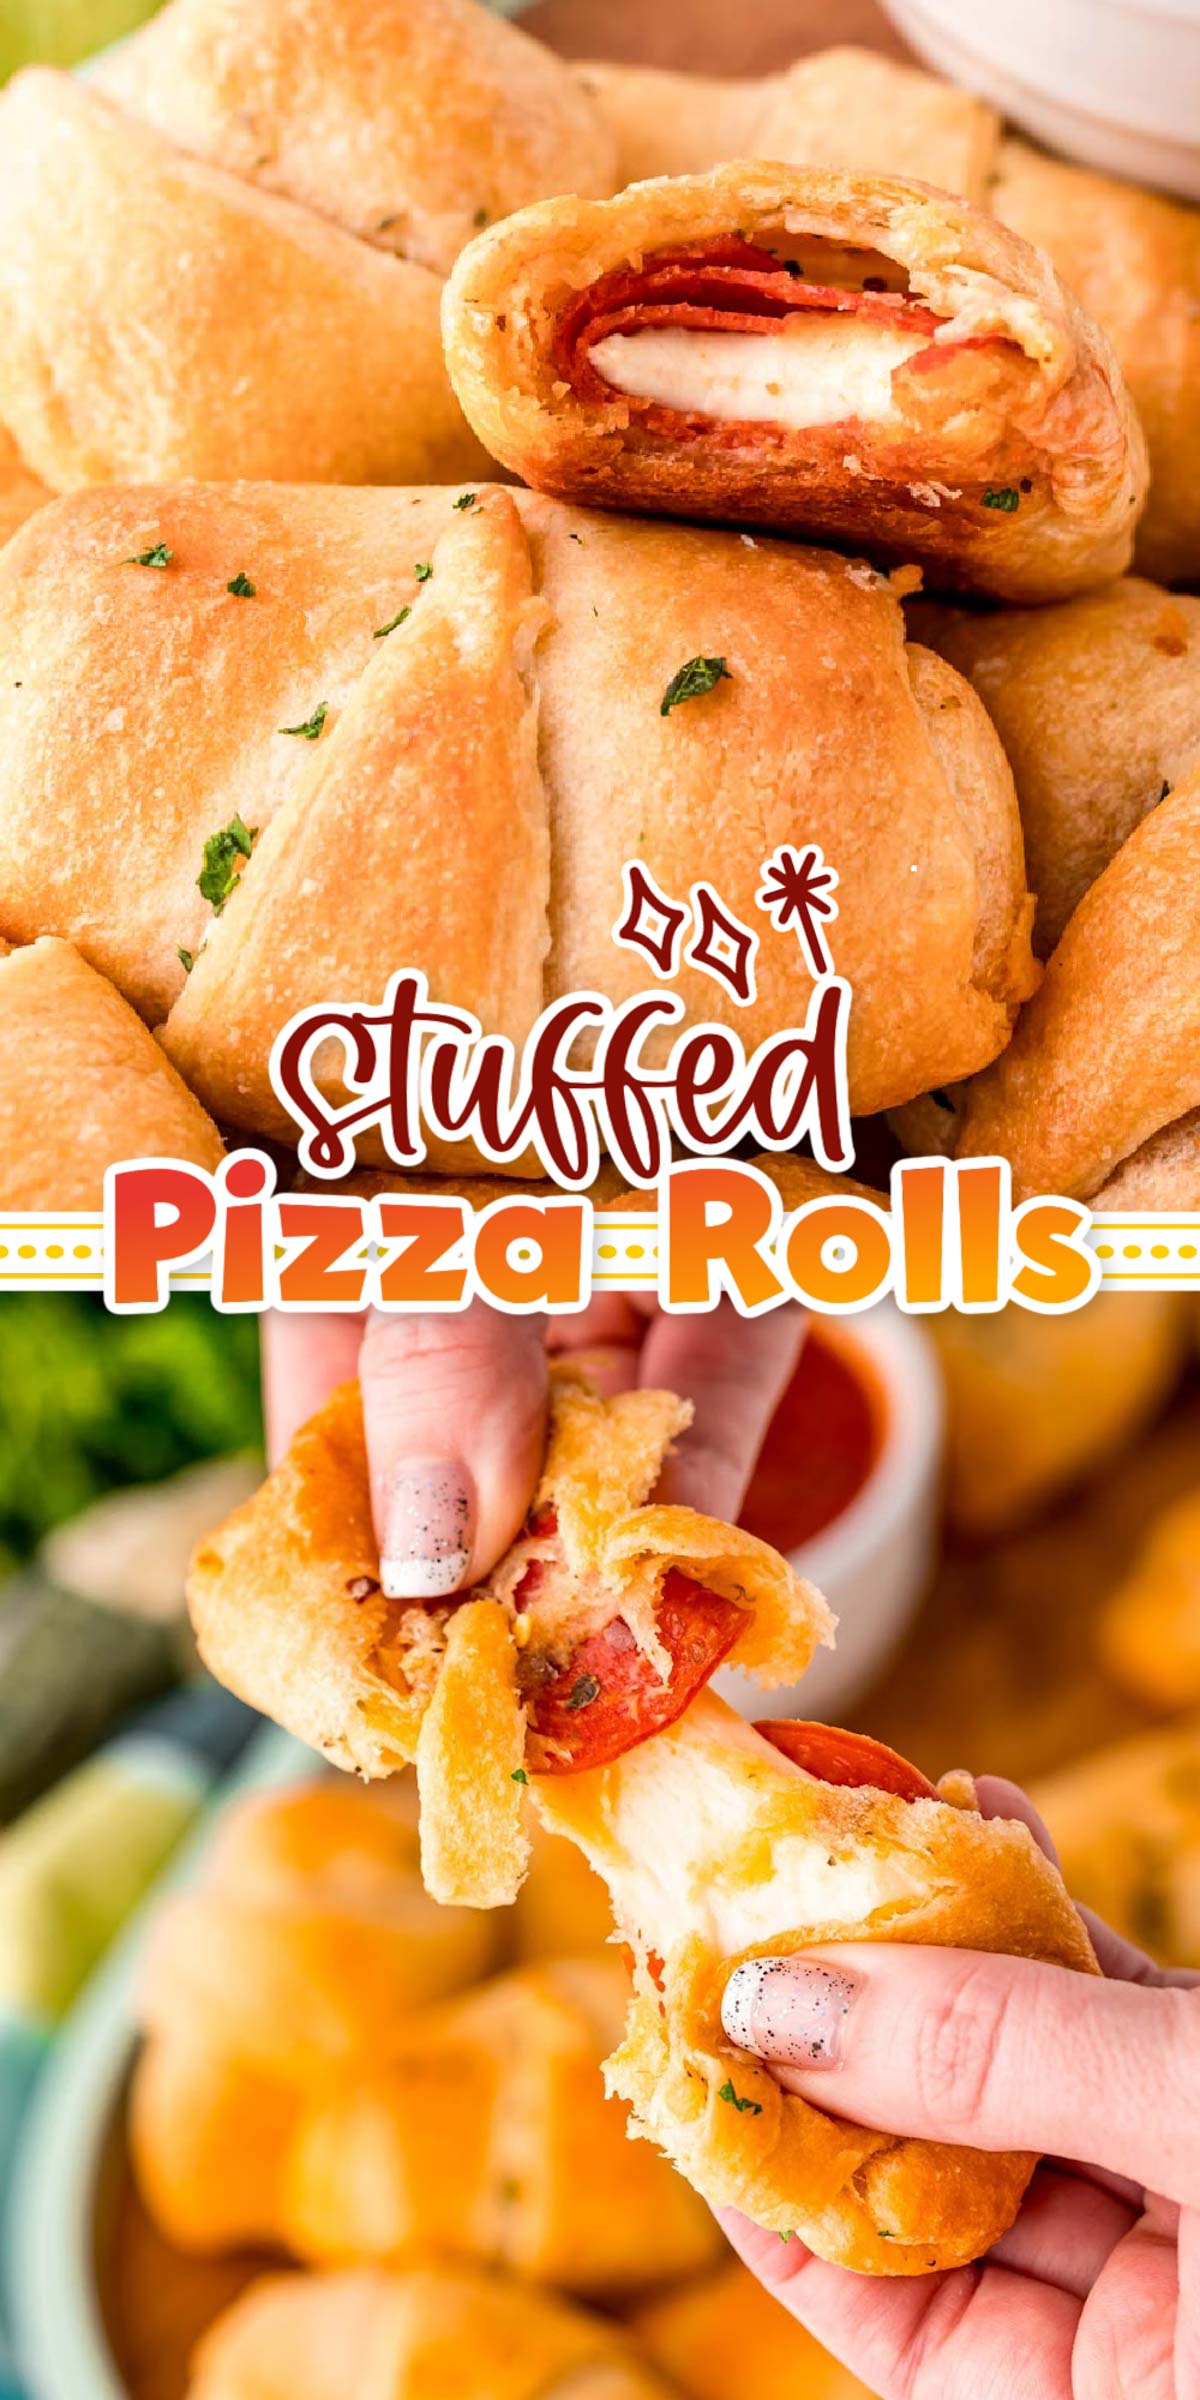 Stuffed Pizza Rolls are packed with mozzarella cheese sticks and pepperoni, then wrapped in a flaky crescent roll! Serve these handheld Pizza Rolls with your favorite pizza sauce and watch as they quickly fly off the plate!  via @sugarandsoulco